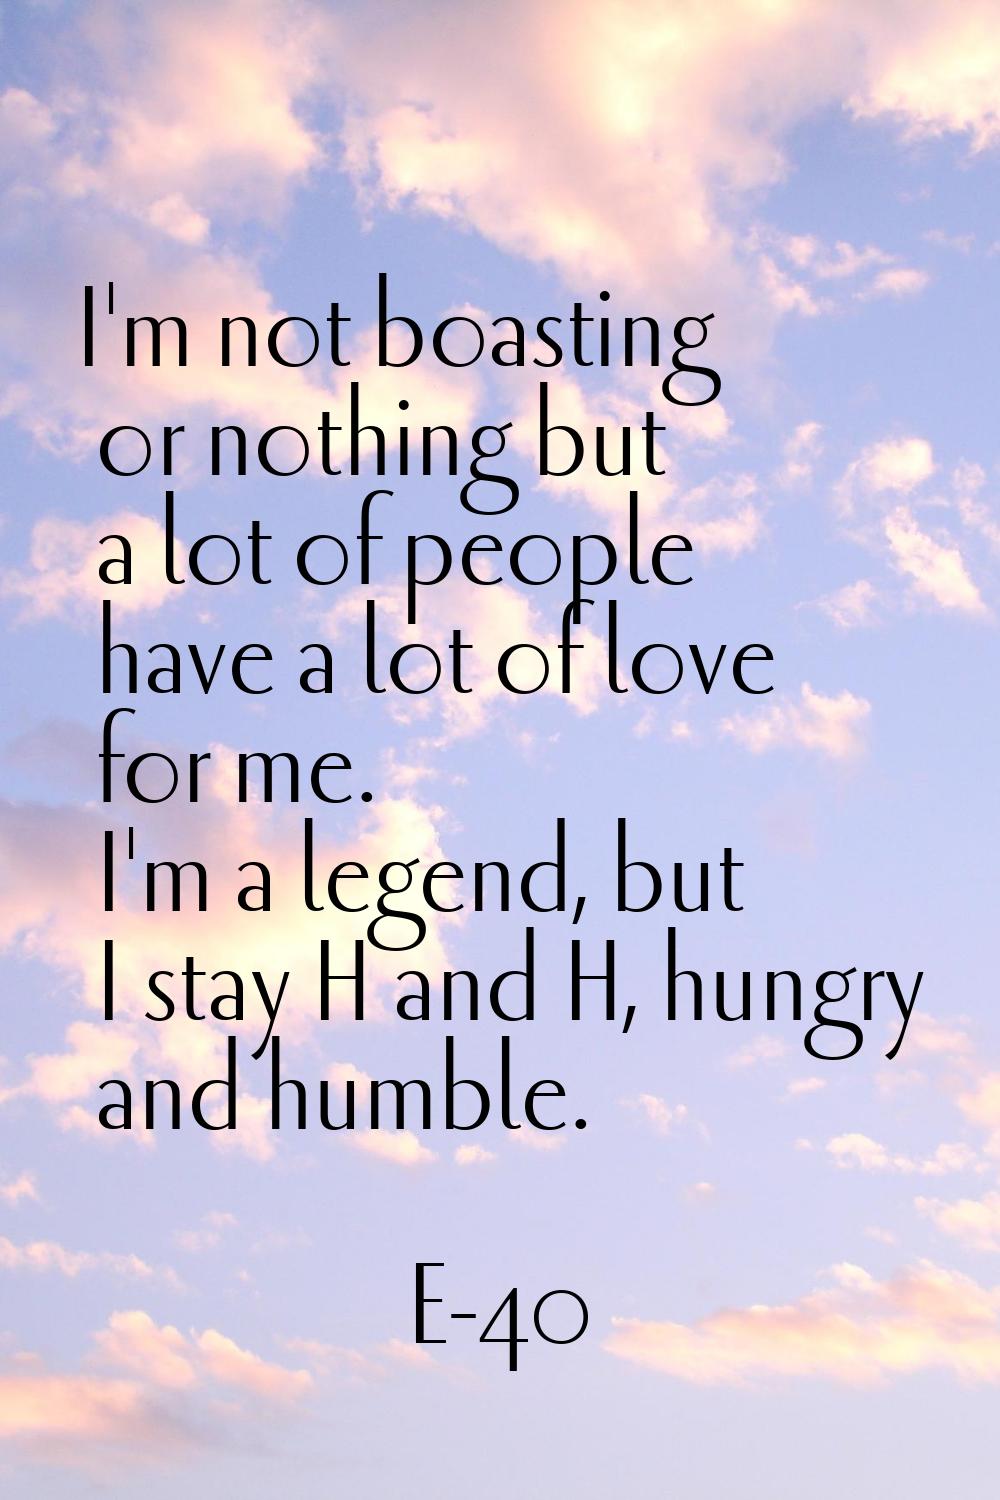 I'm not boasting or nothing but a lot of people have a lot of love for me. I'm a legend, but I stay